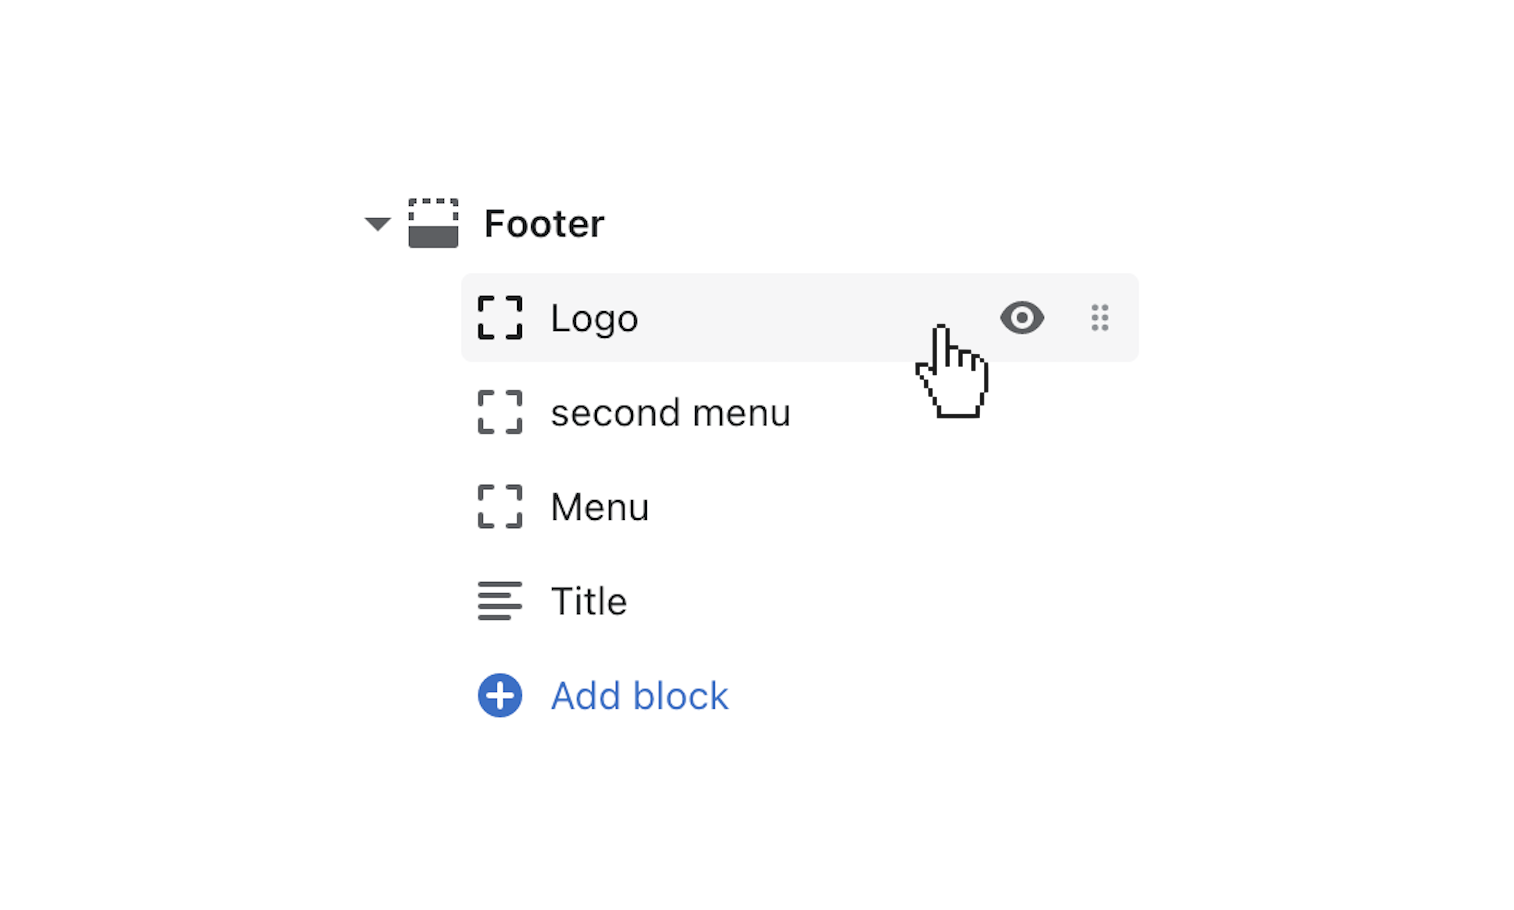 click_a_footer_block_to_open_its_settings.png